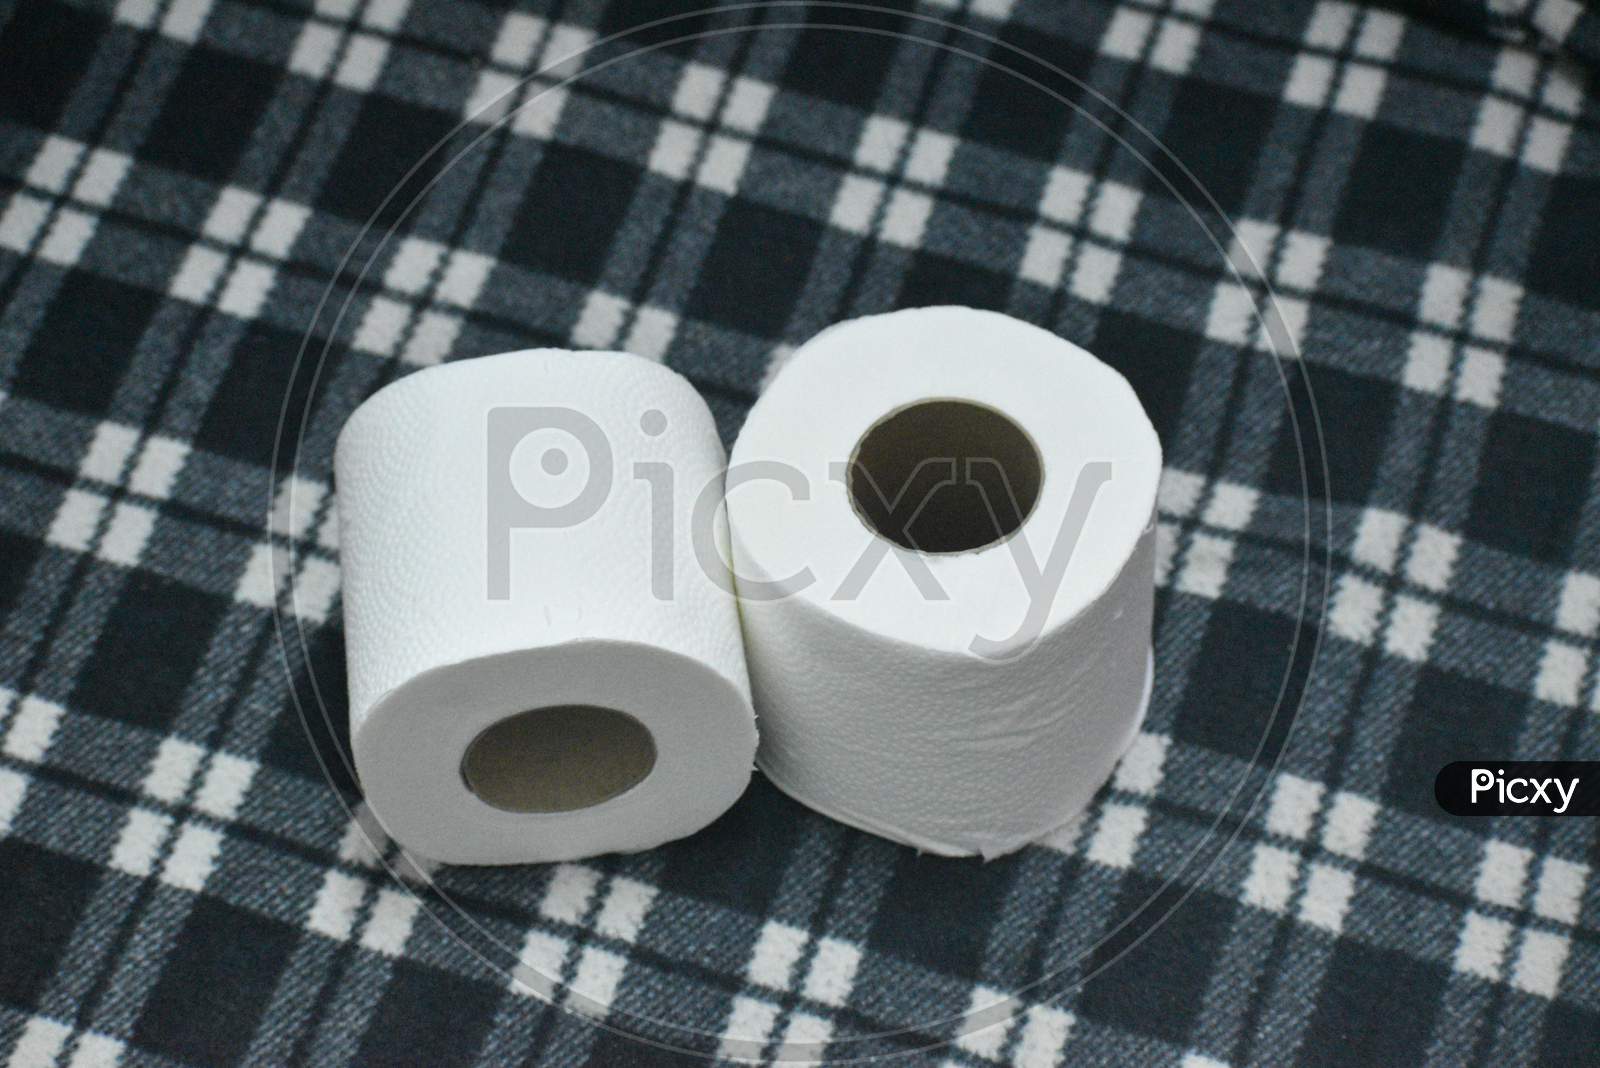 Closeup View Of Toilet Paper Rolls Isolated In Black Background